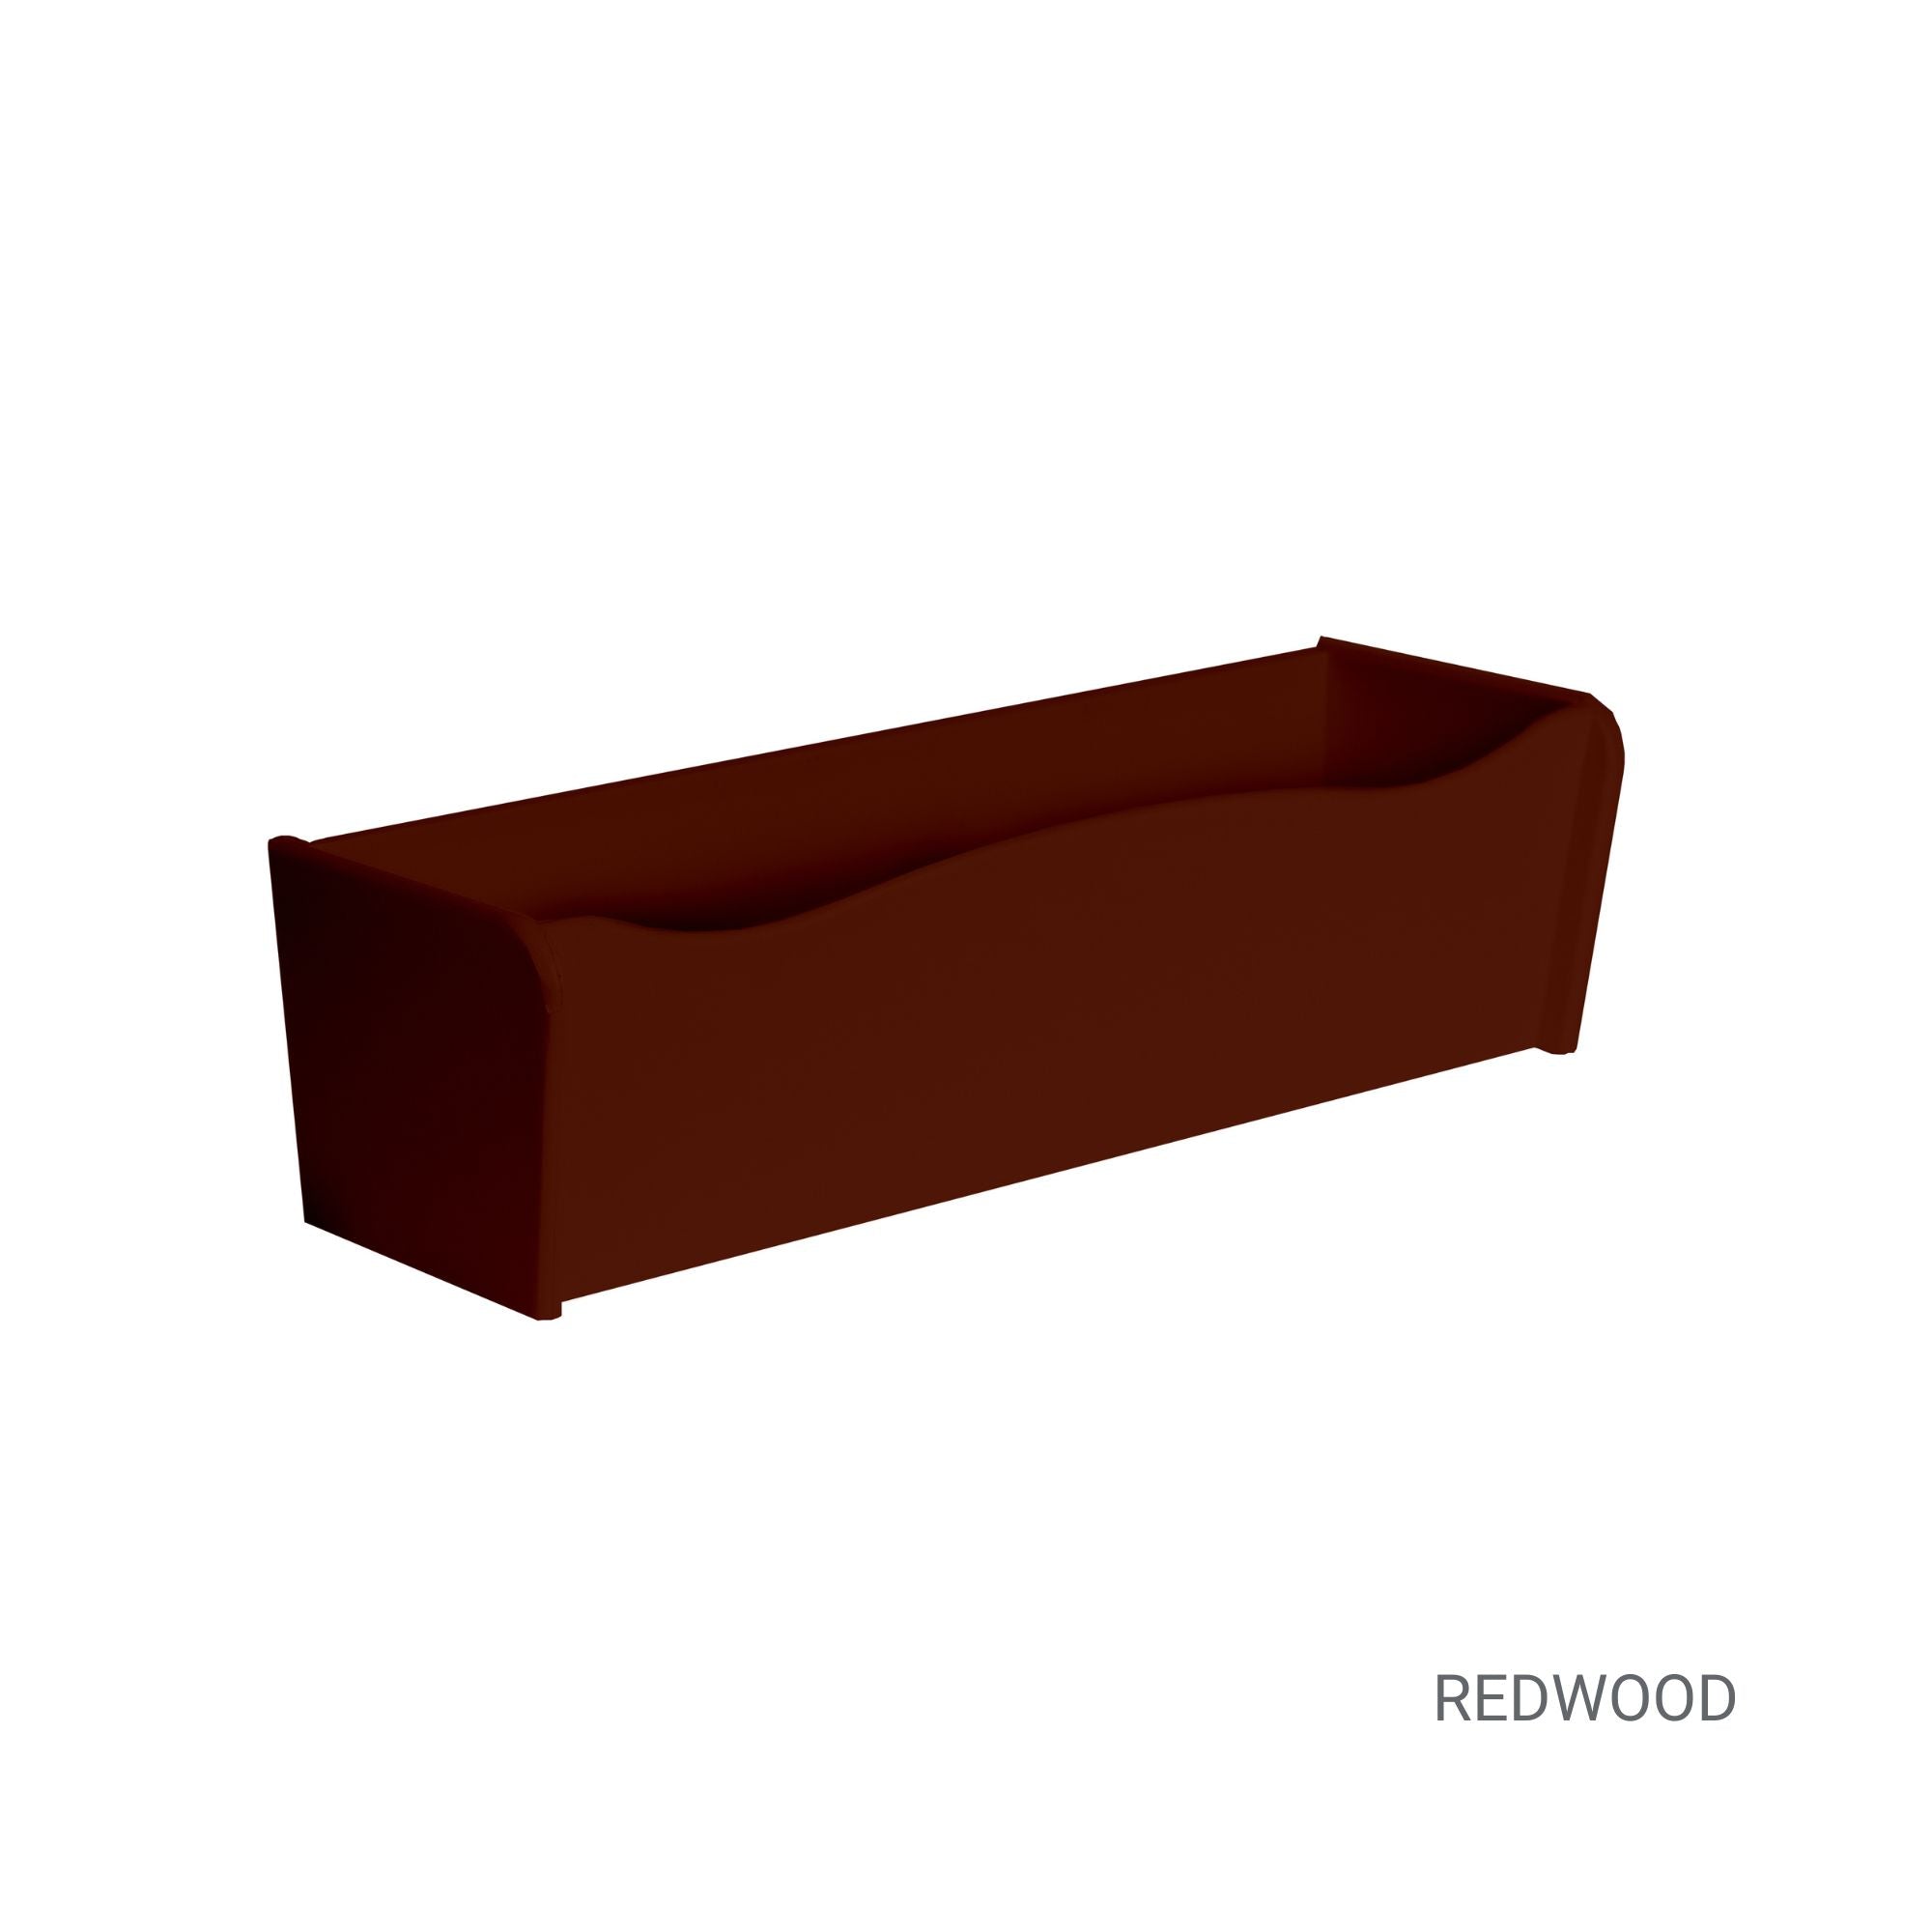 18" x 6" x 5" Flower Box in Redwood for Window Sills, Sheds, Playhouses, and MORE